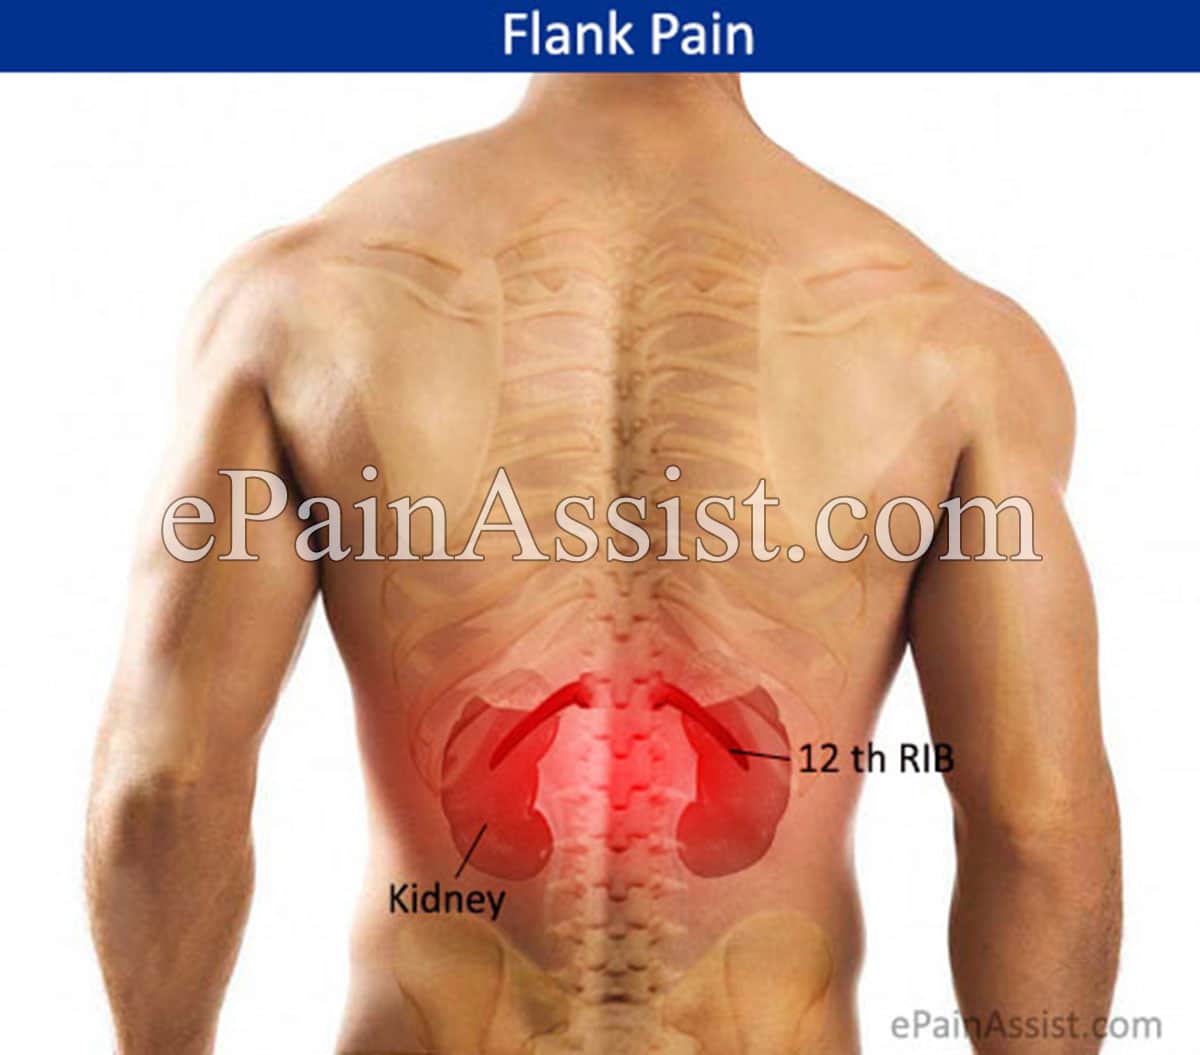 What Can Cause Pain in the Flank Region?